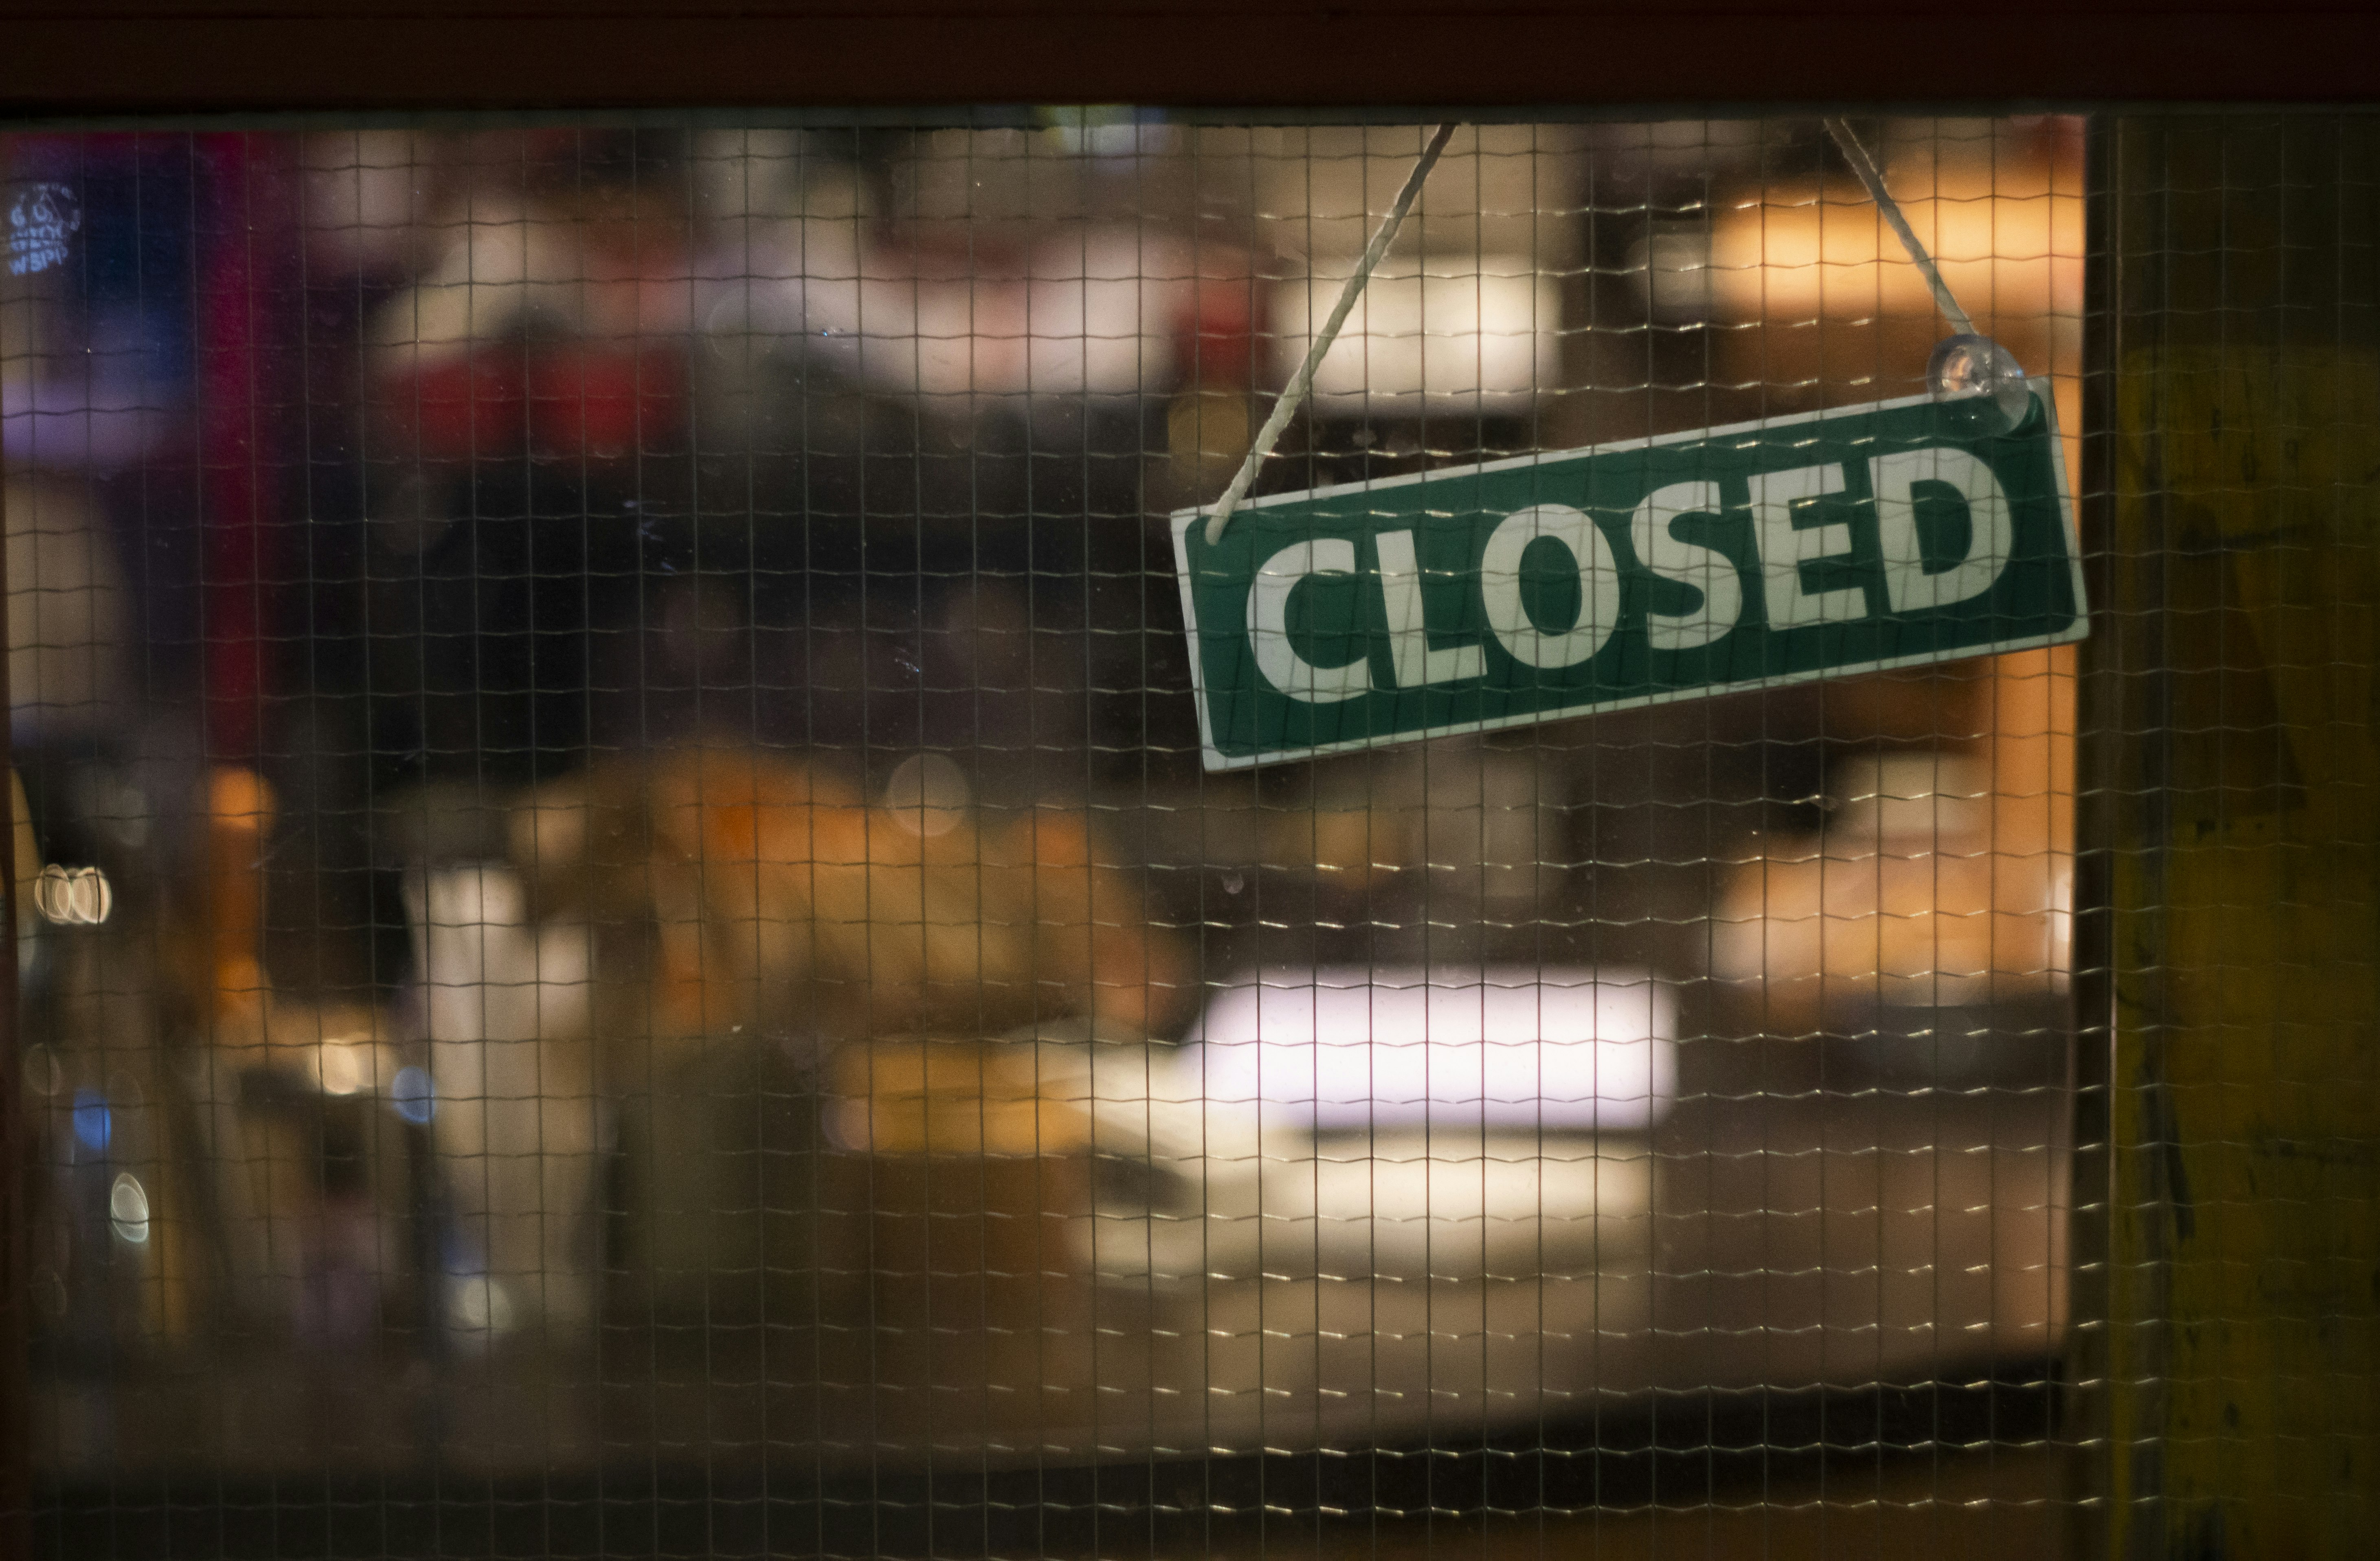 A "closed" sign in a window covered with wire